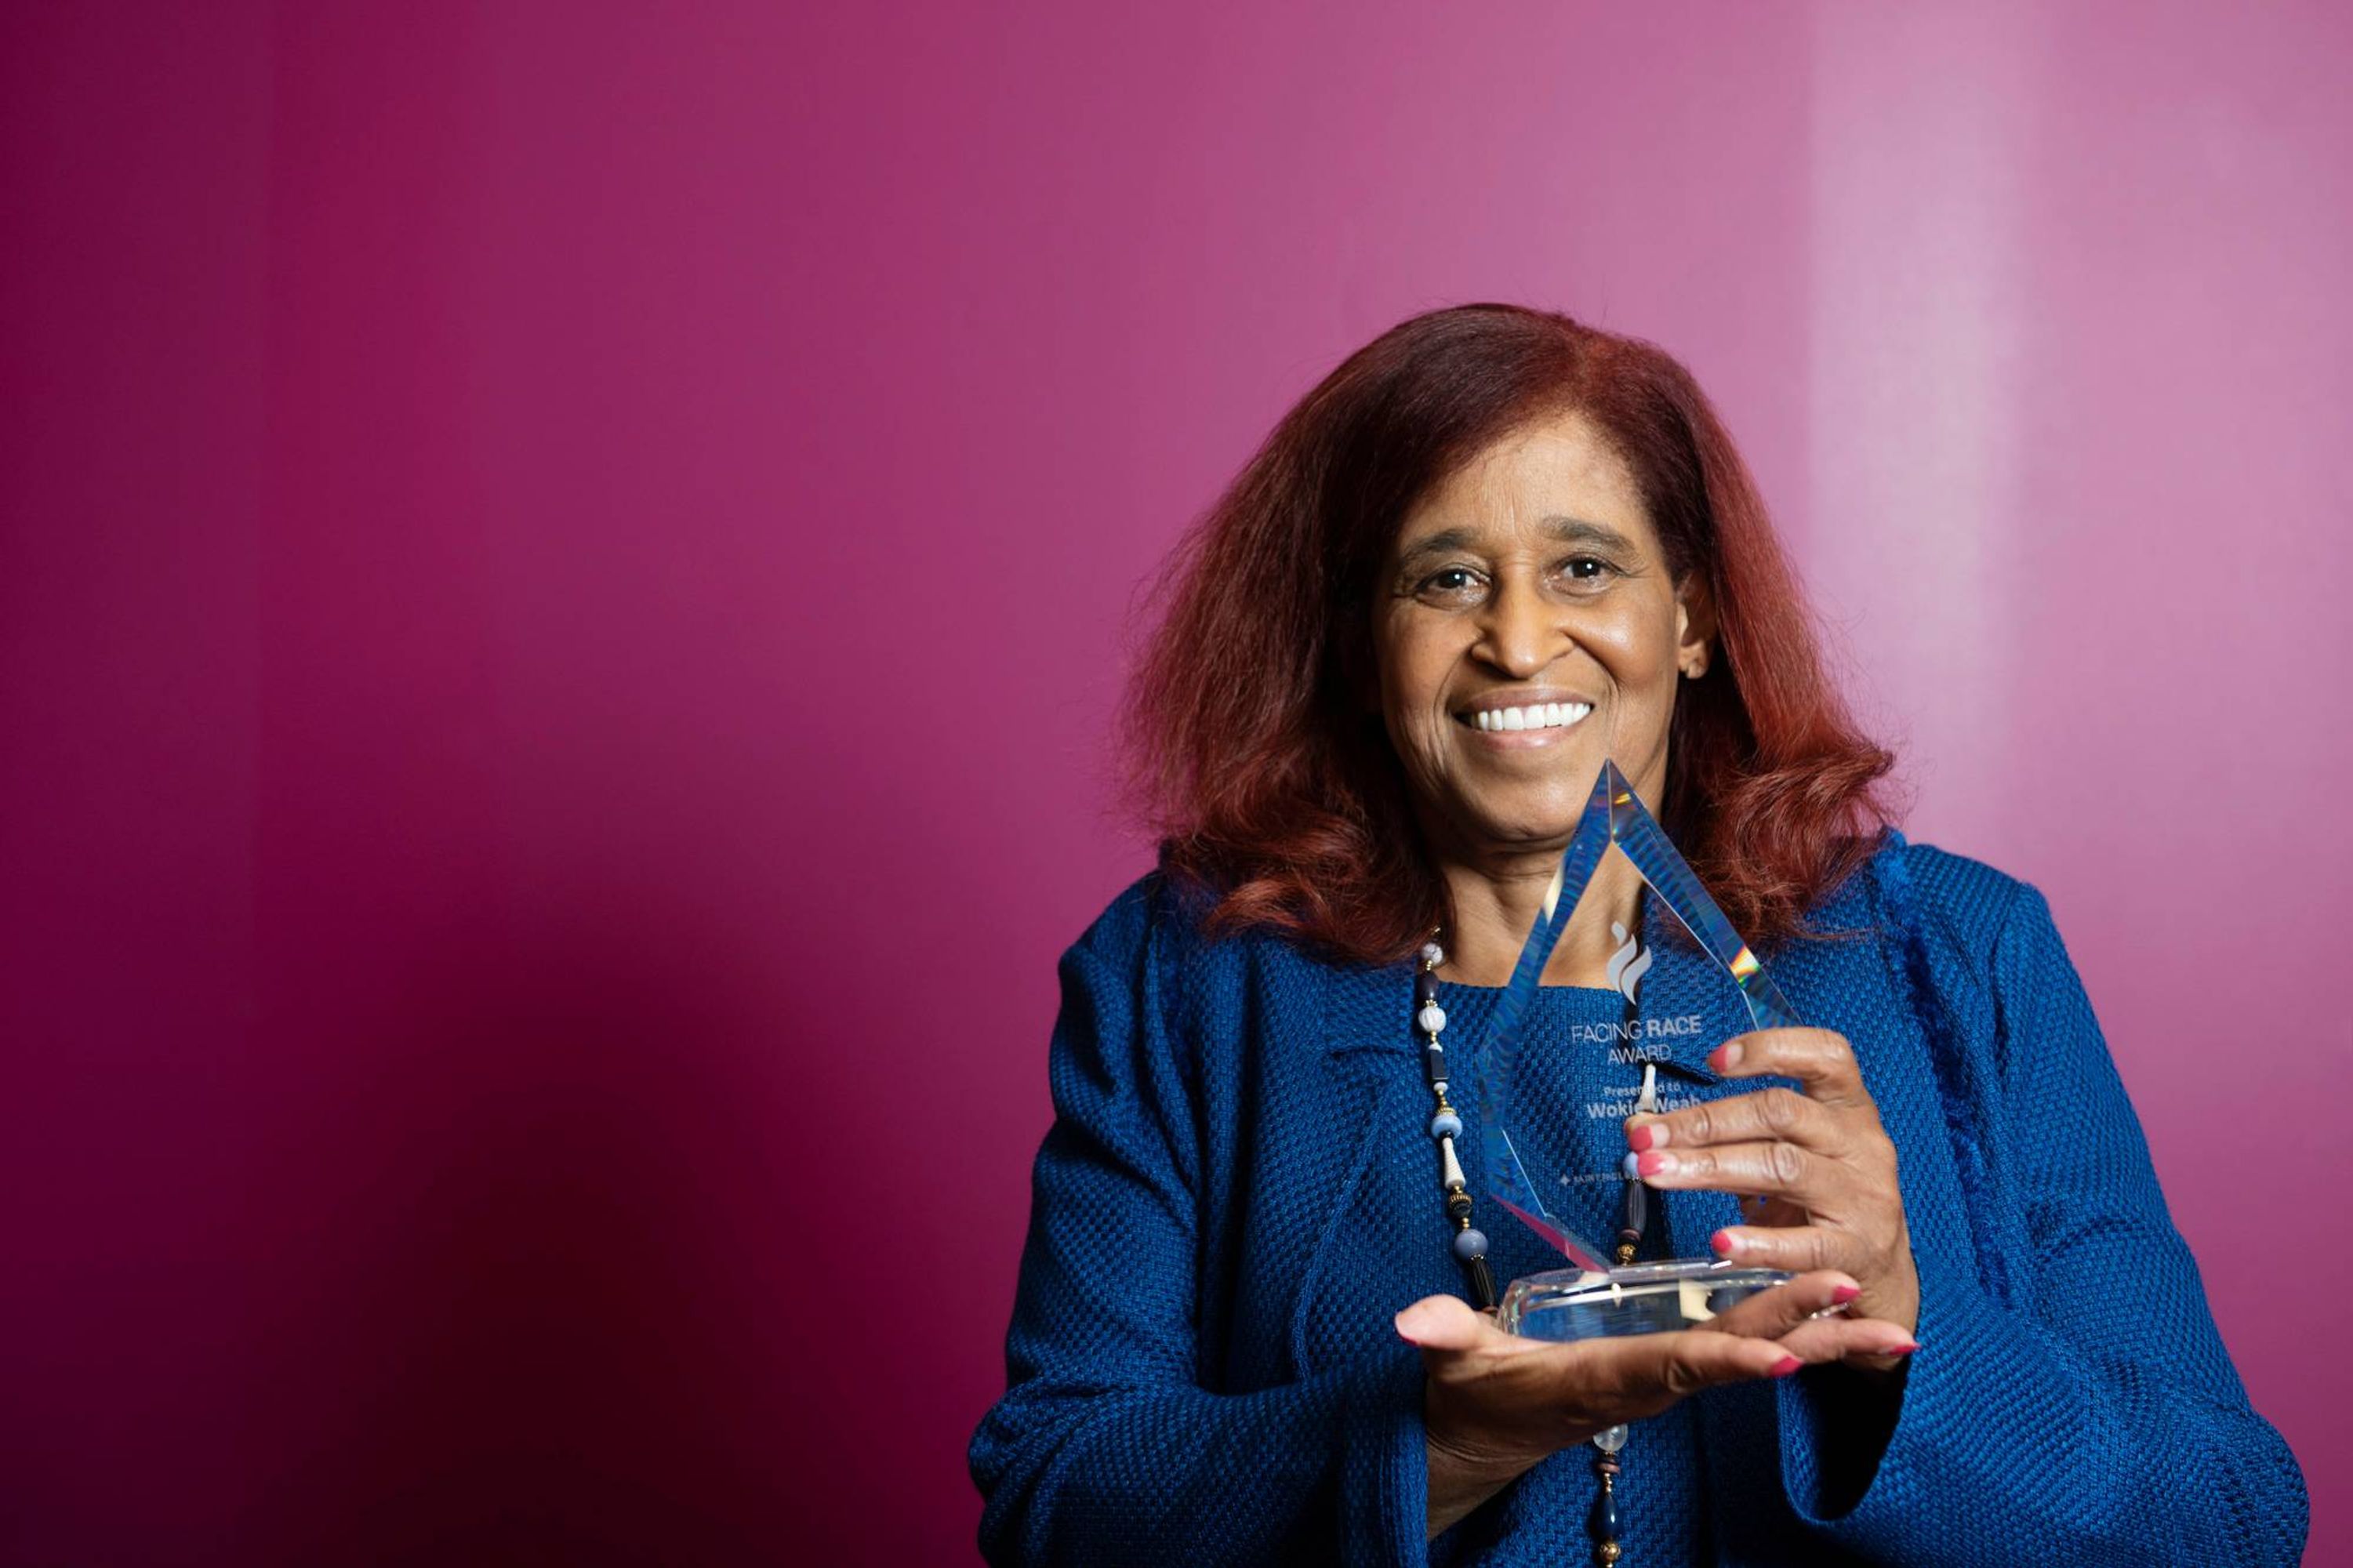 A smiling woman poses with an award.